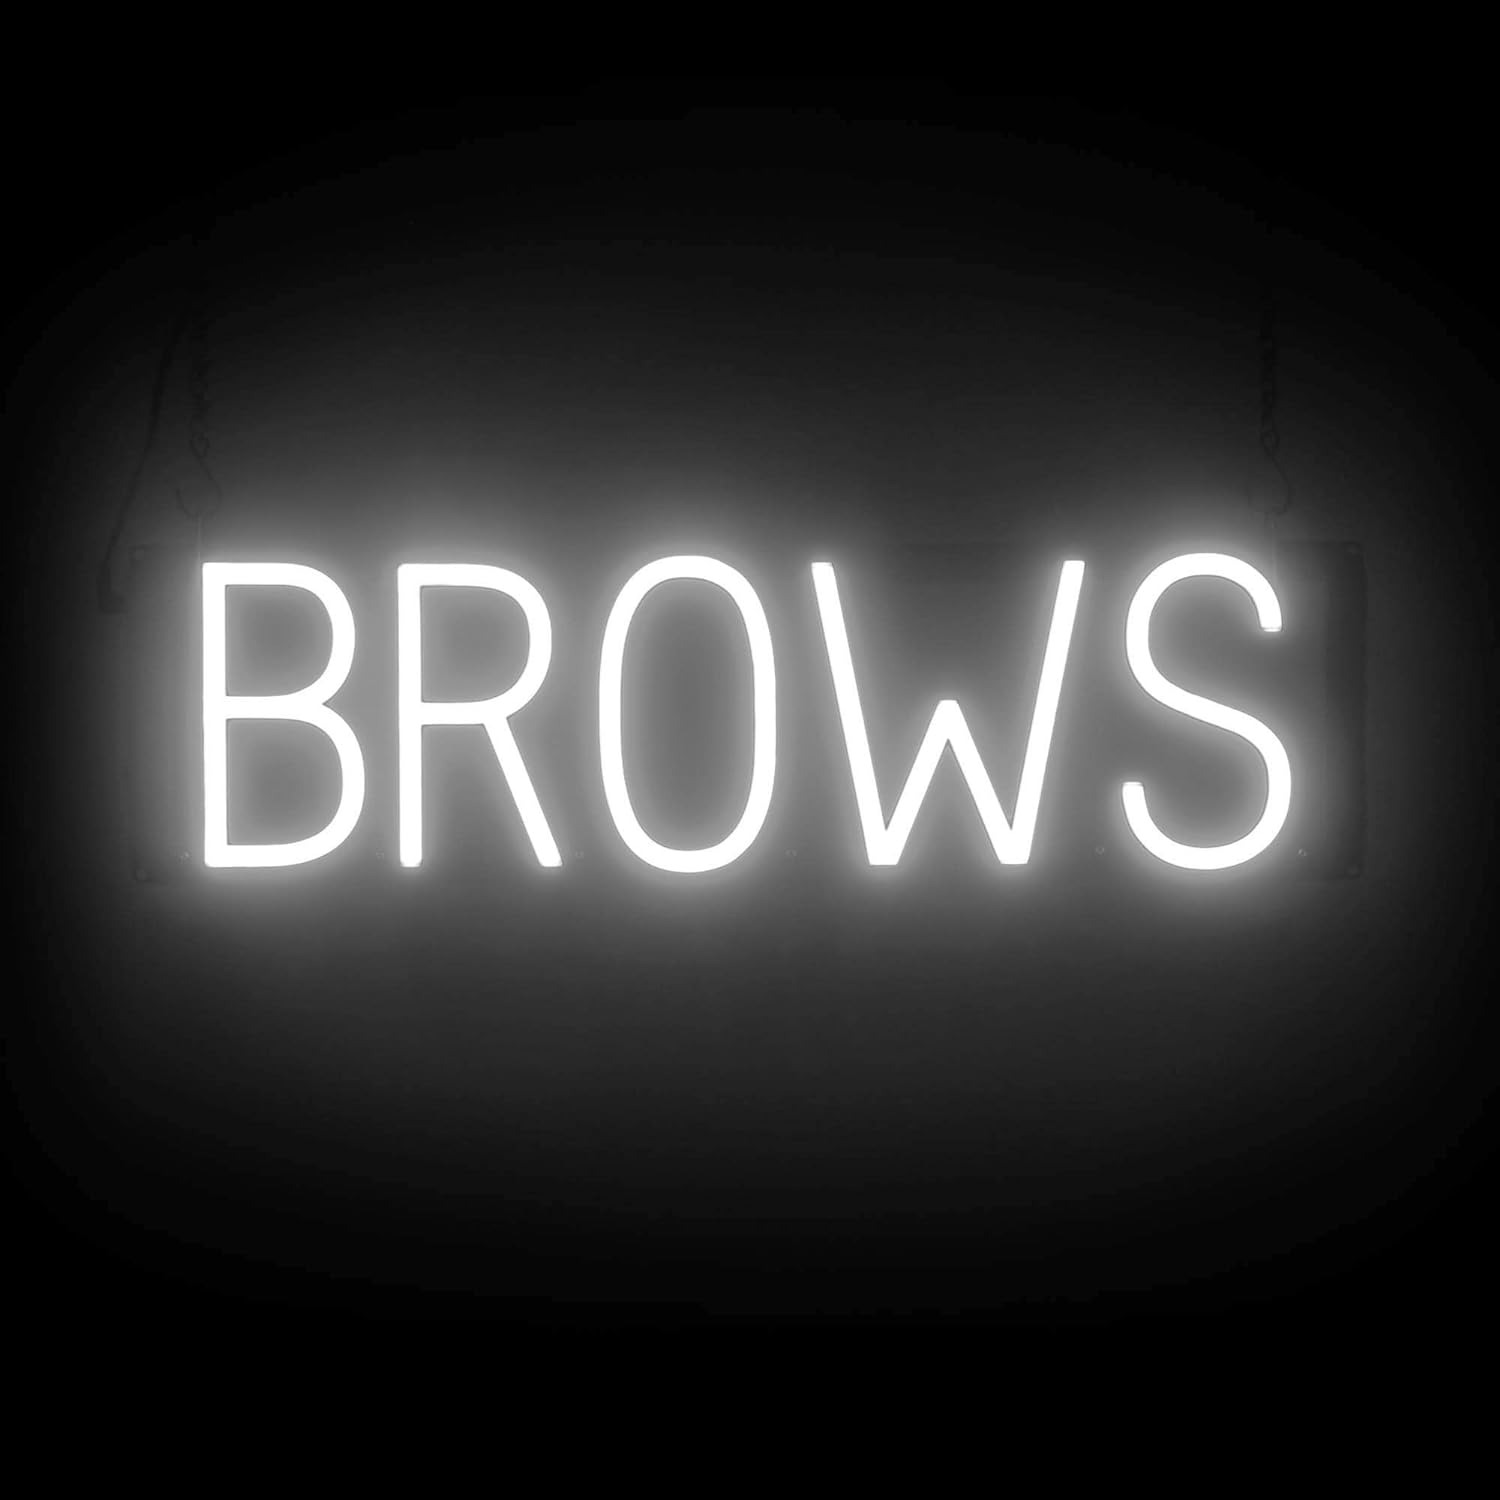 BROWS Neon-Led Sign for Beauty Salons. 22.6\